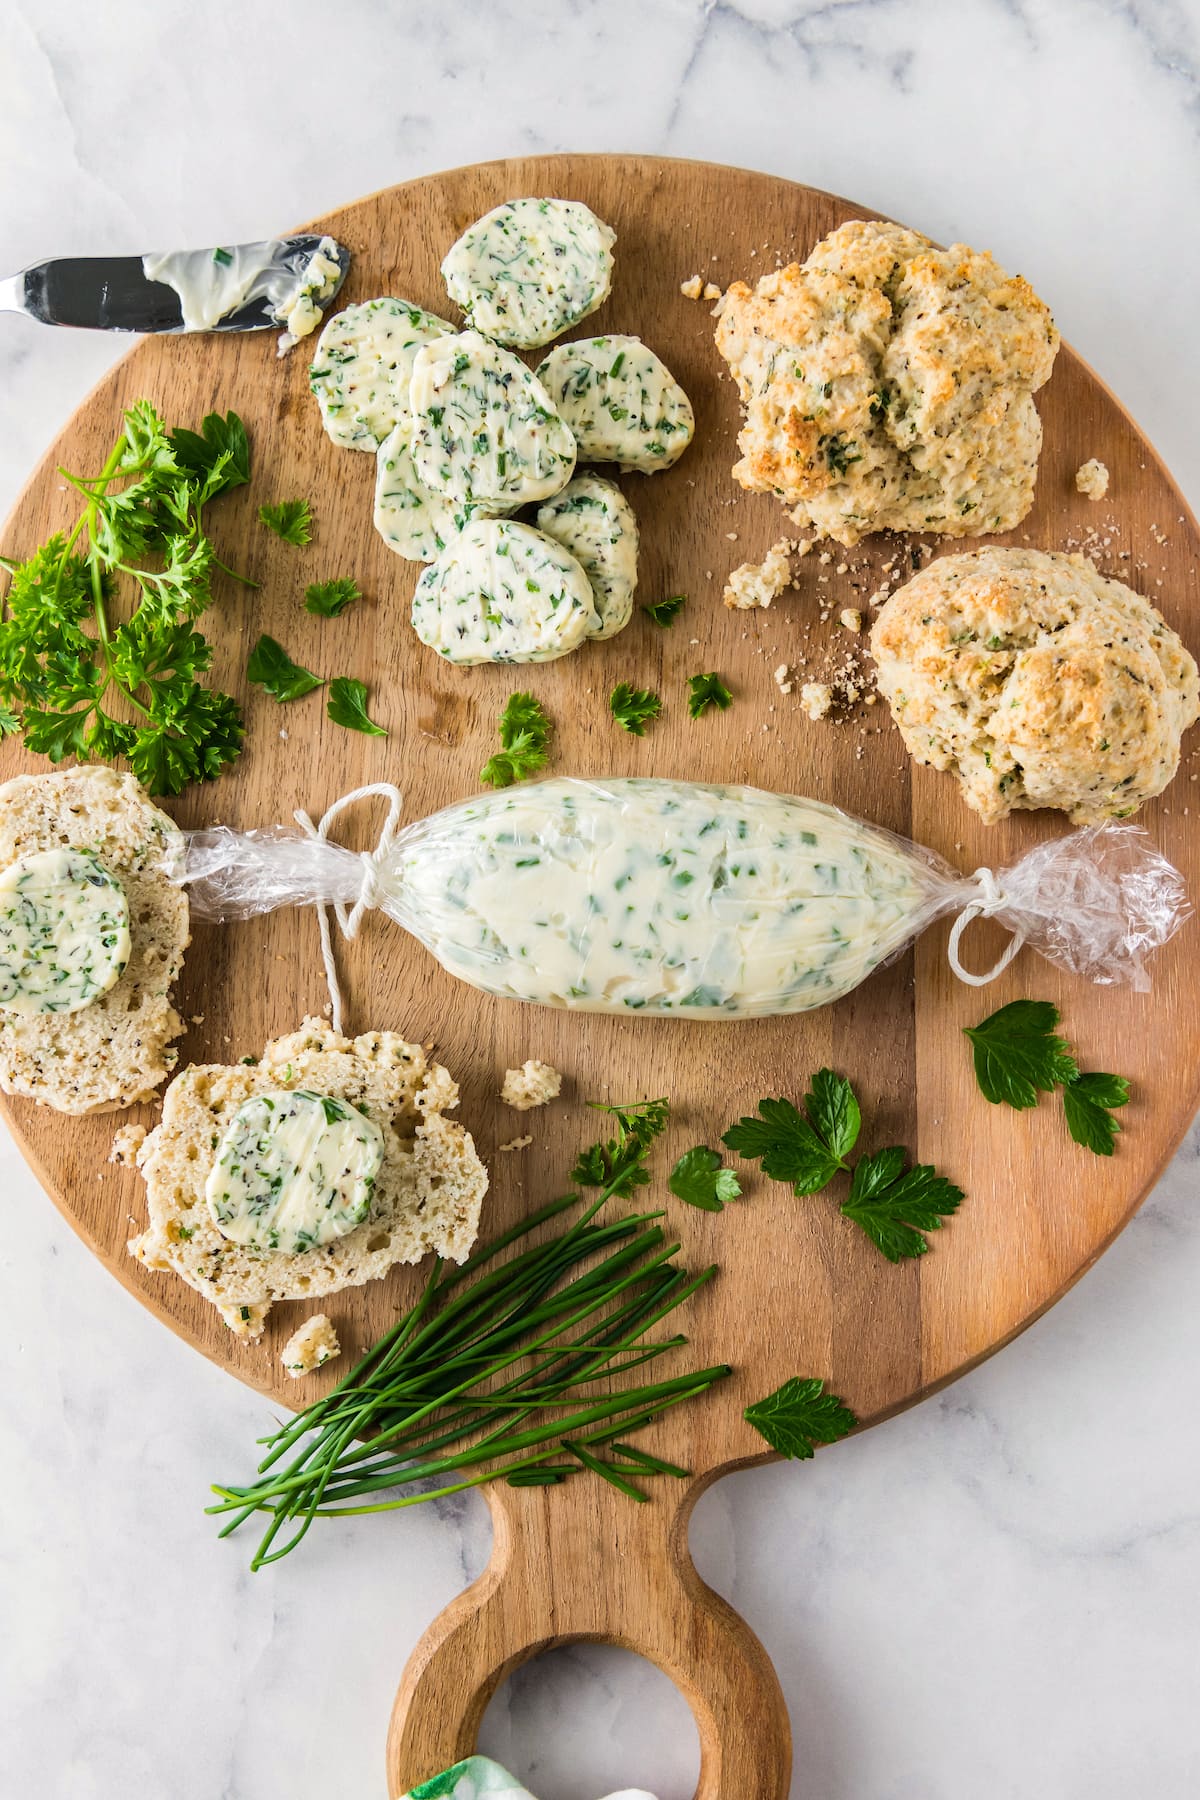 a platter with pads of garlic herb butter, biscuits, and a log of garlic butter